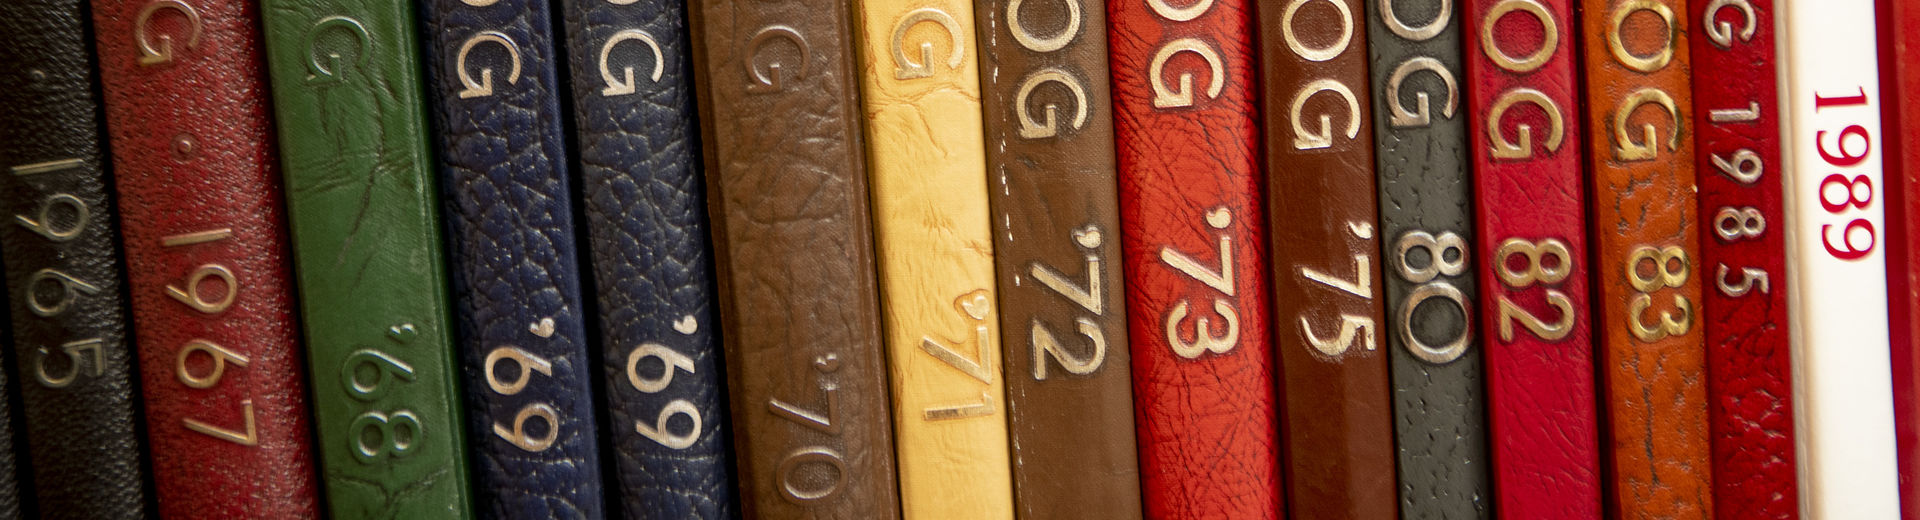 A row of yearbooks from the Kornberg School of Dentistry.